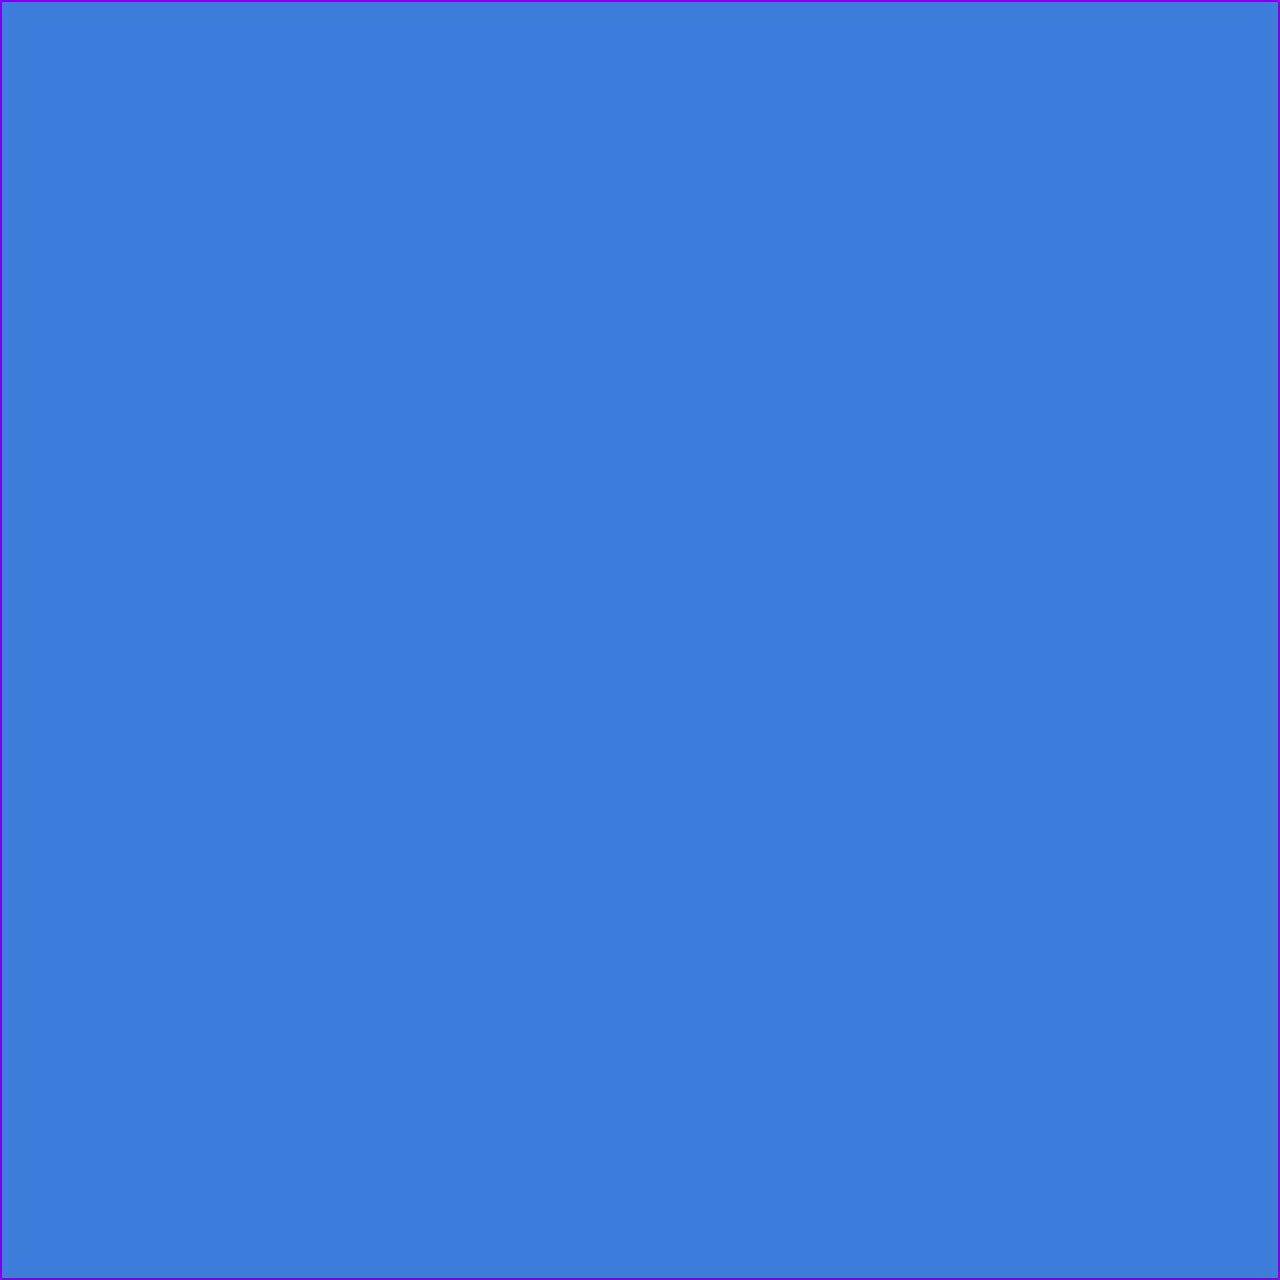 Waterslide Decal Sheet: Mid Blue Enamel for Fused Glass or Ceramics (33704)